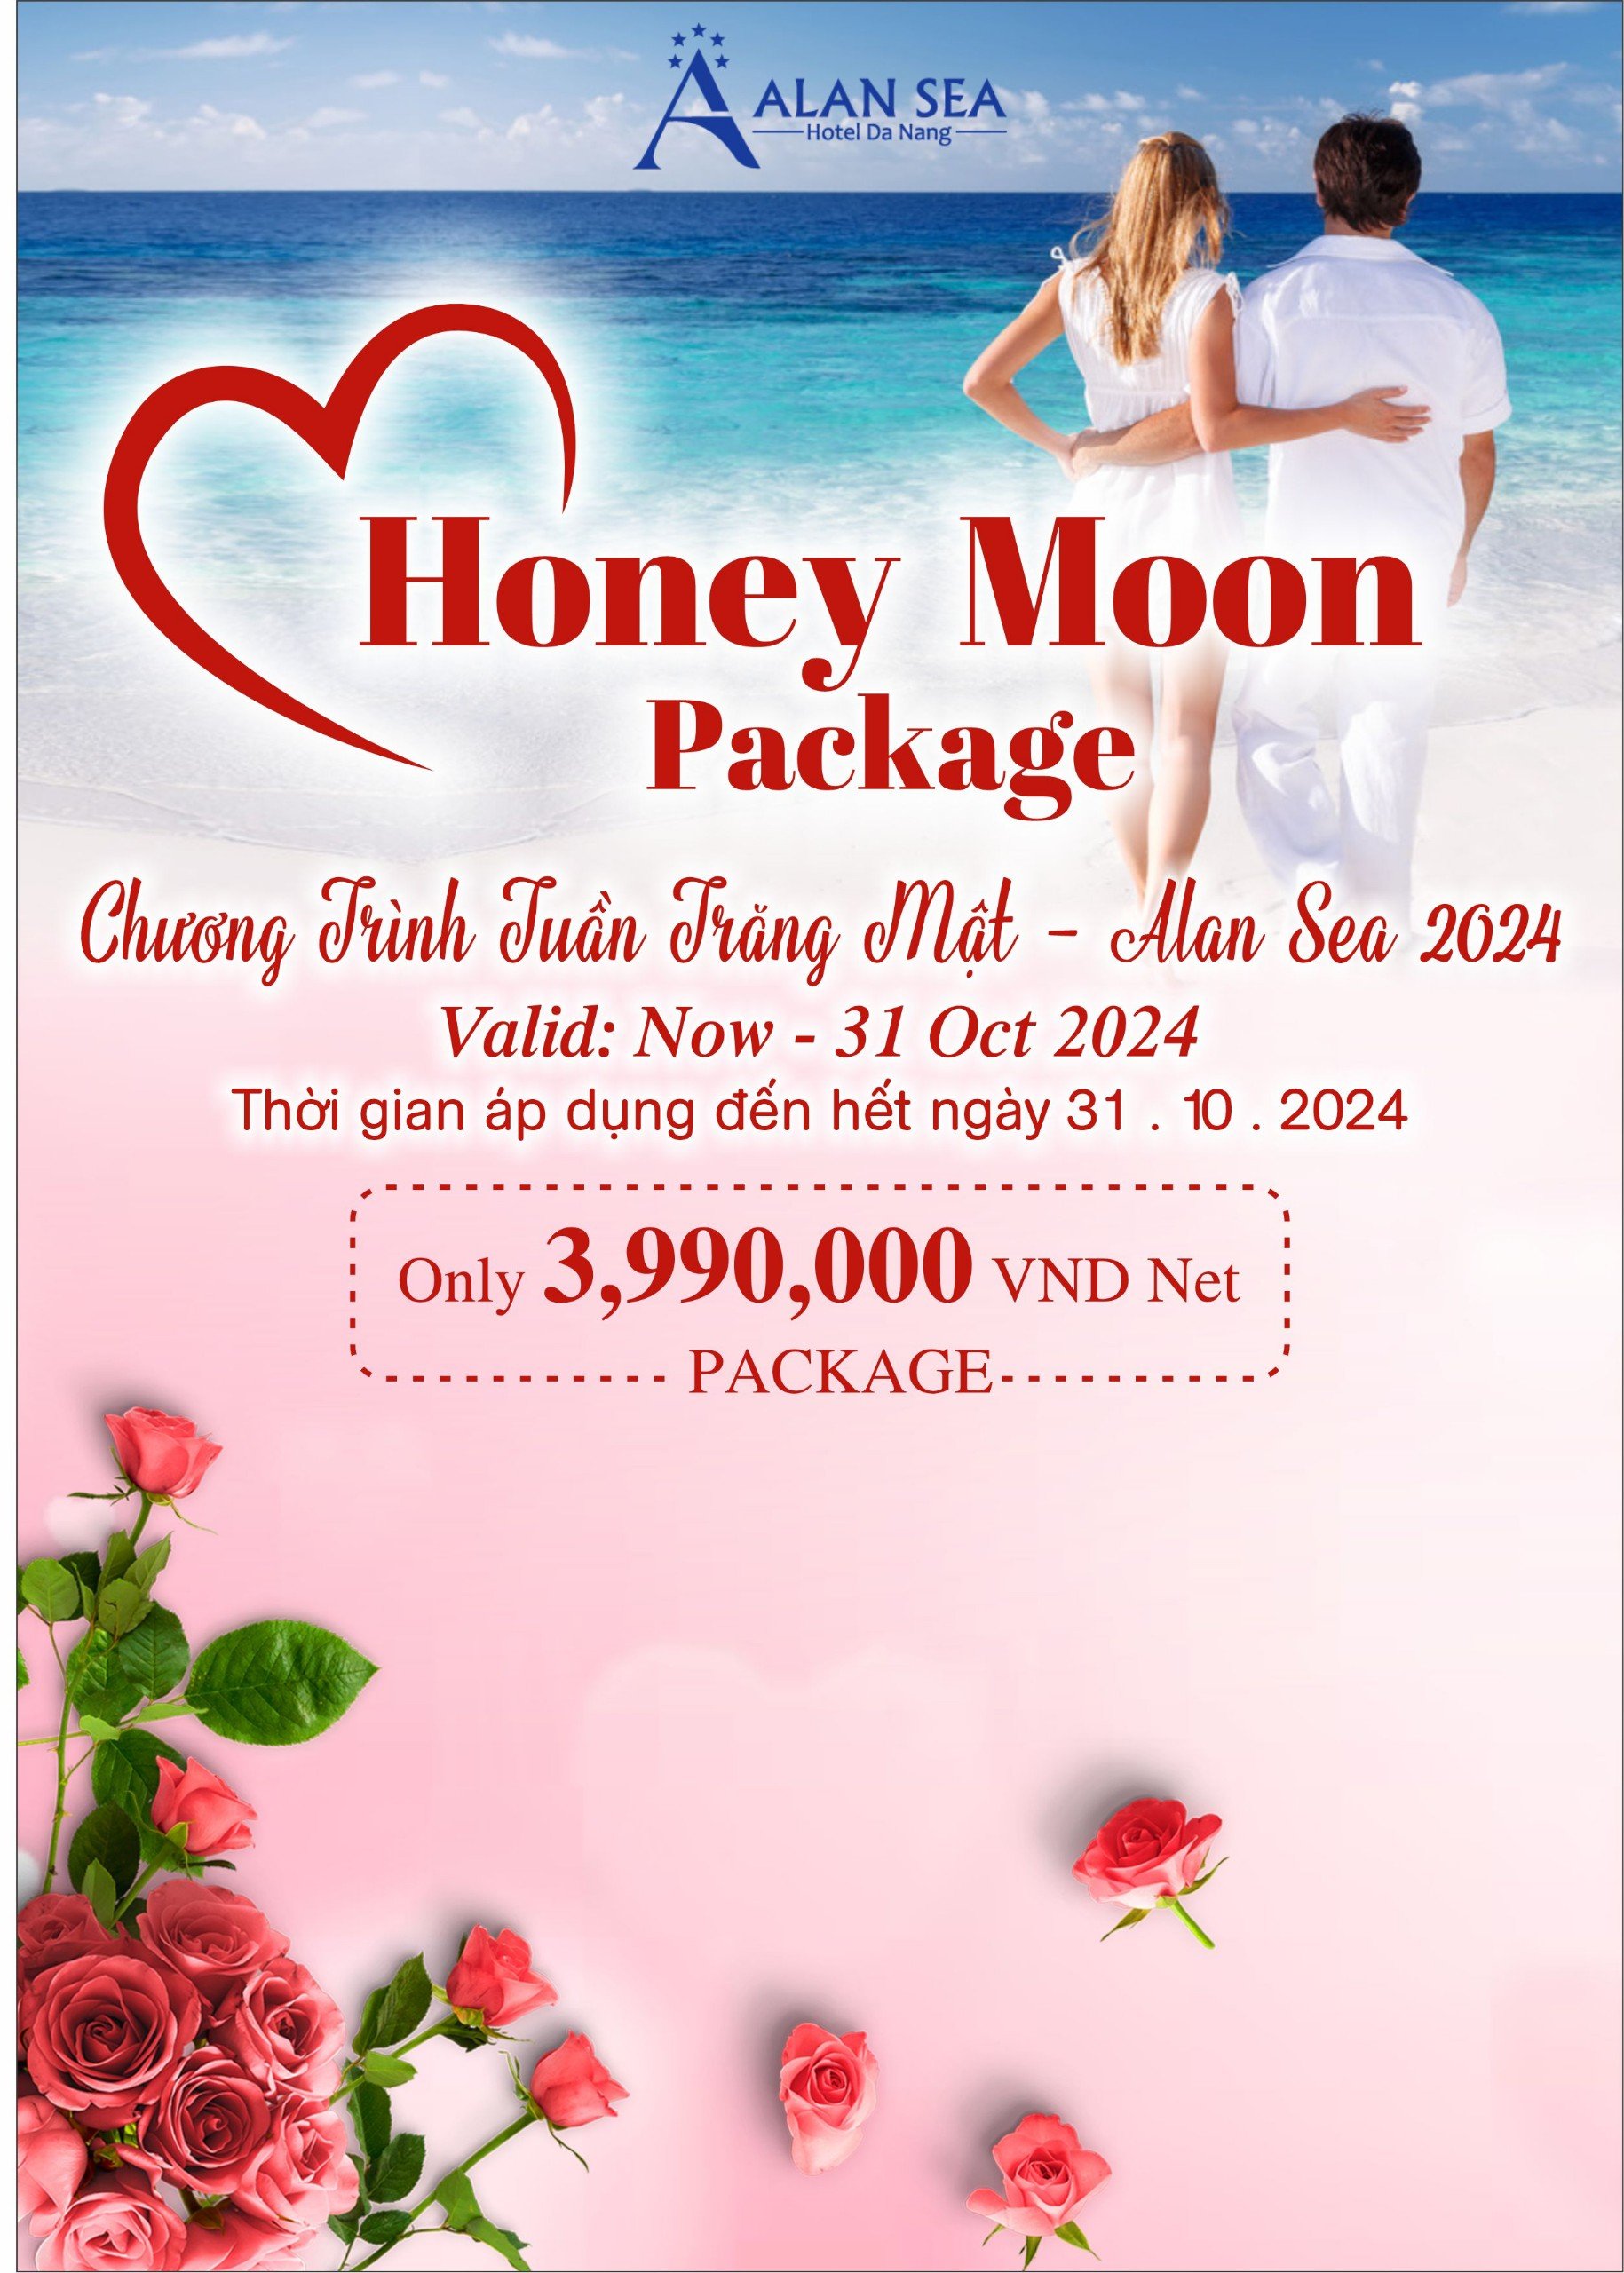 HONEY MOON PACKAGE  (3 DAYS/2 NIGHTS) AT VND3,990,000